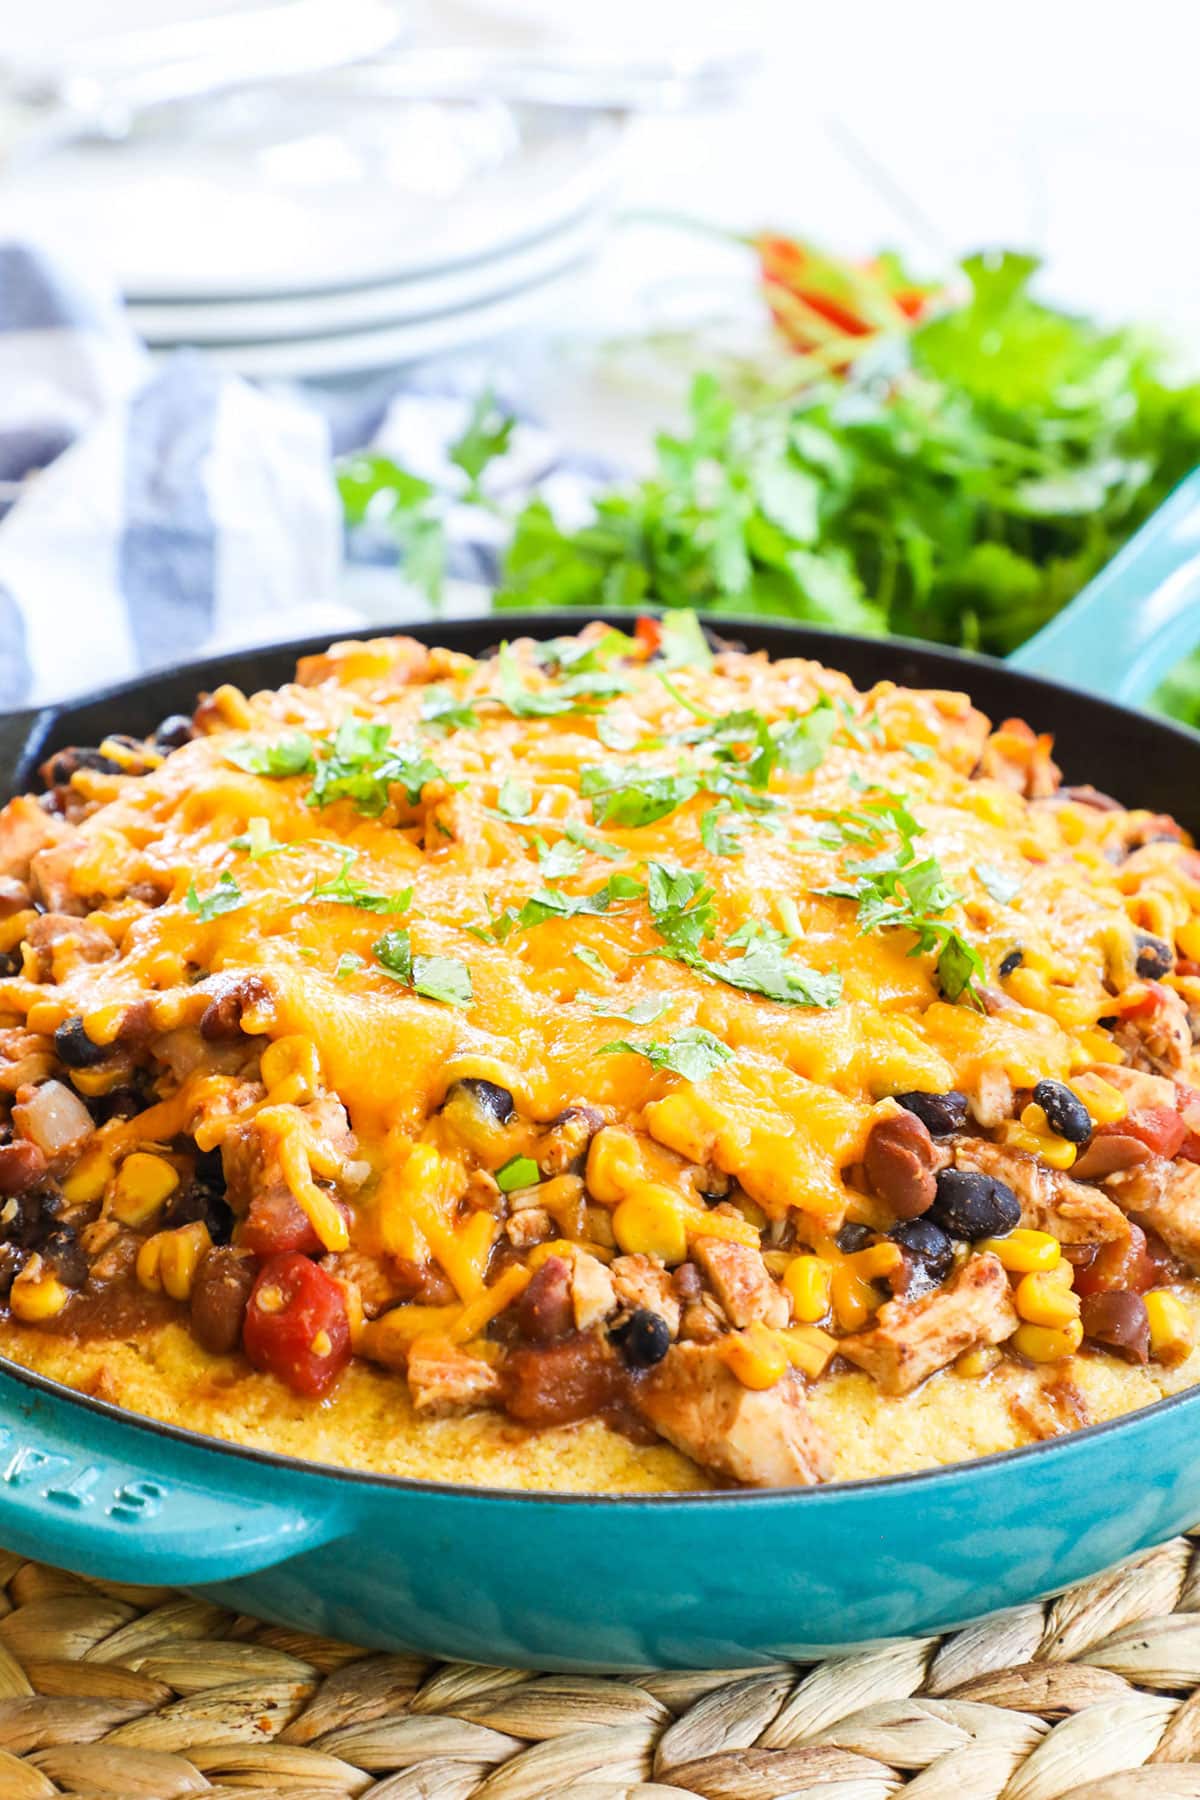 Chili Pie in a skillet